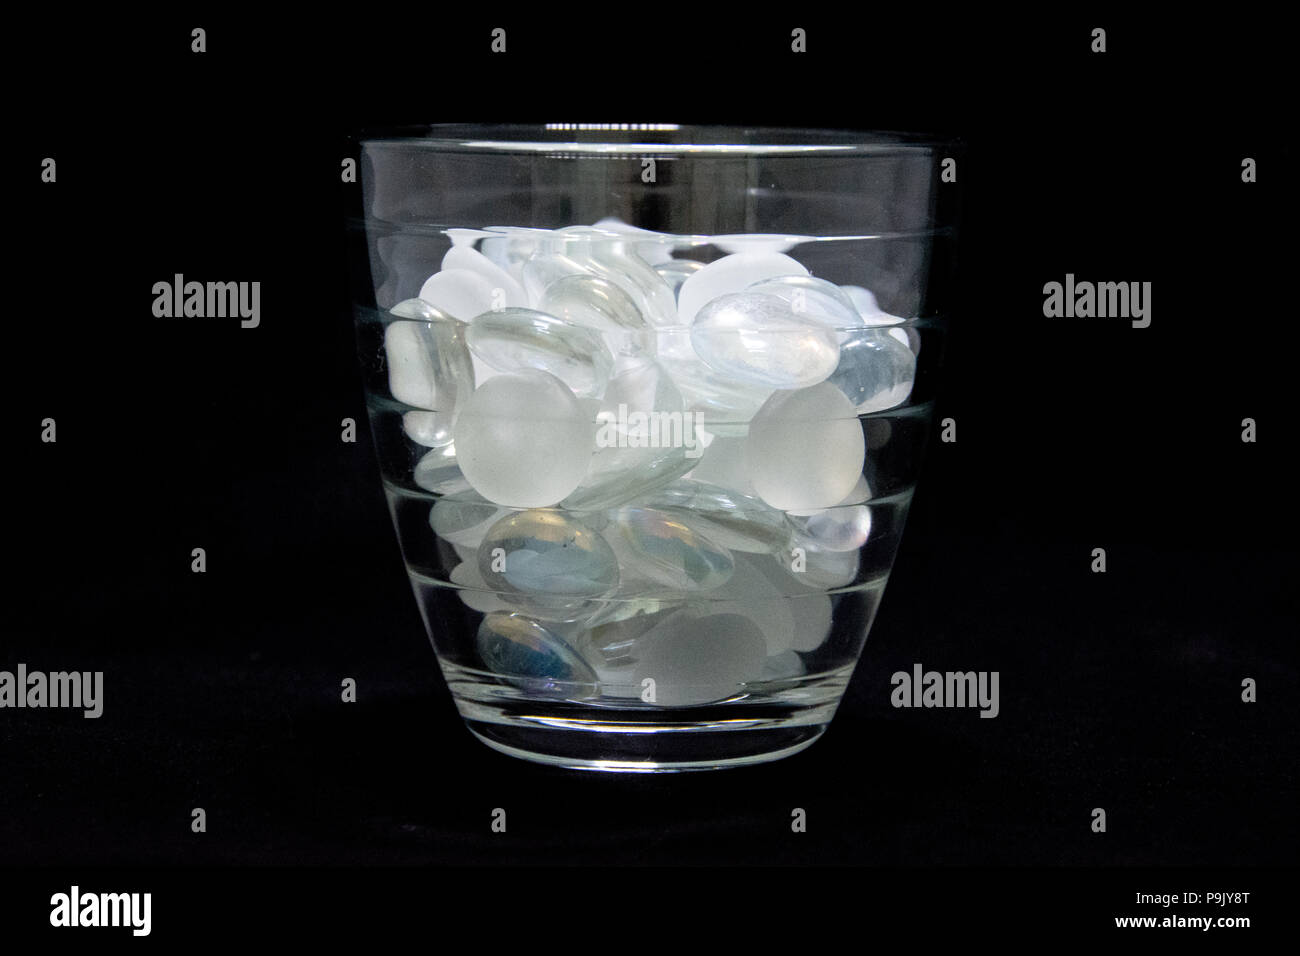 https://c8.alamy.com/comp/P9JY8T/a-small-tumbler-glass-full-of-white-and-frosted-marble-on-a-black-backdrop-P9JY8T.jpg